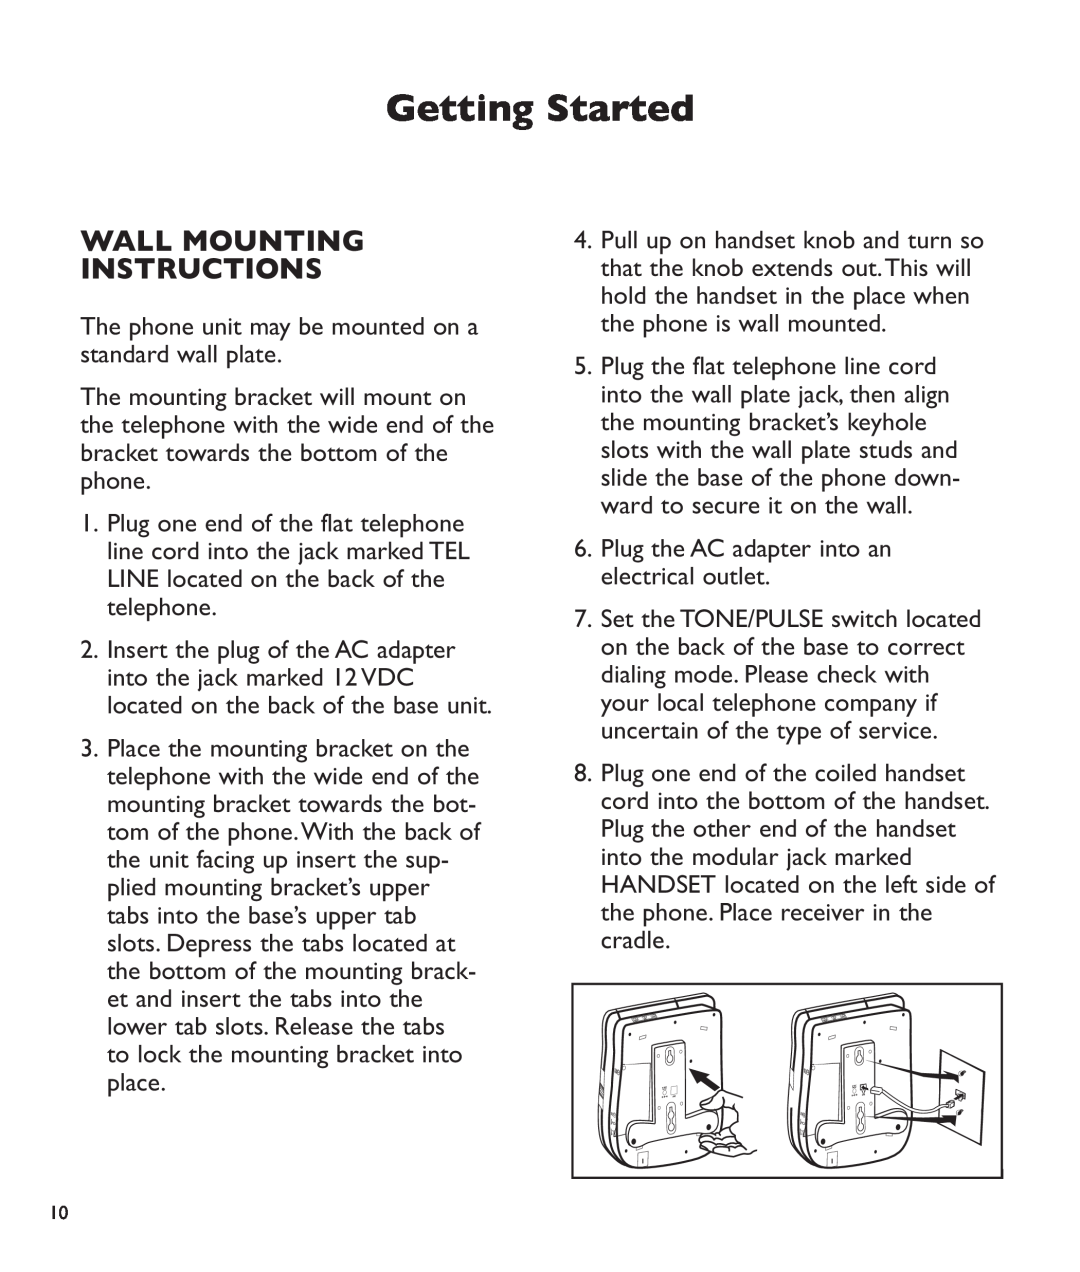 Clarity c2210 manual Wall Mounting Instructions, Getting Started 